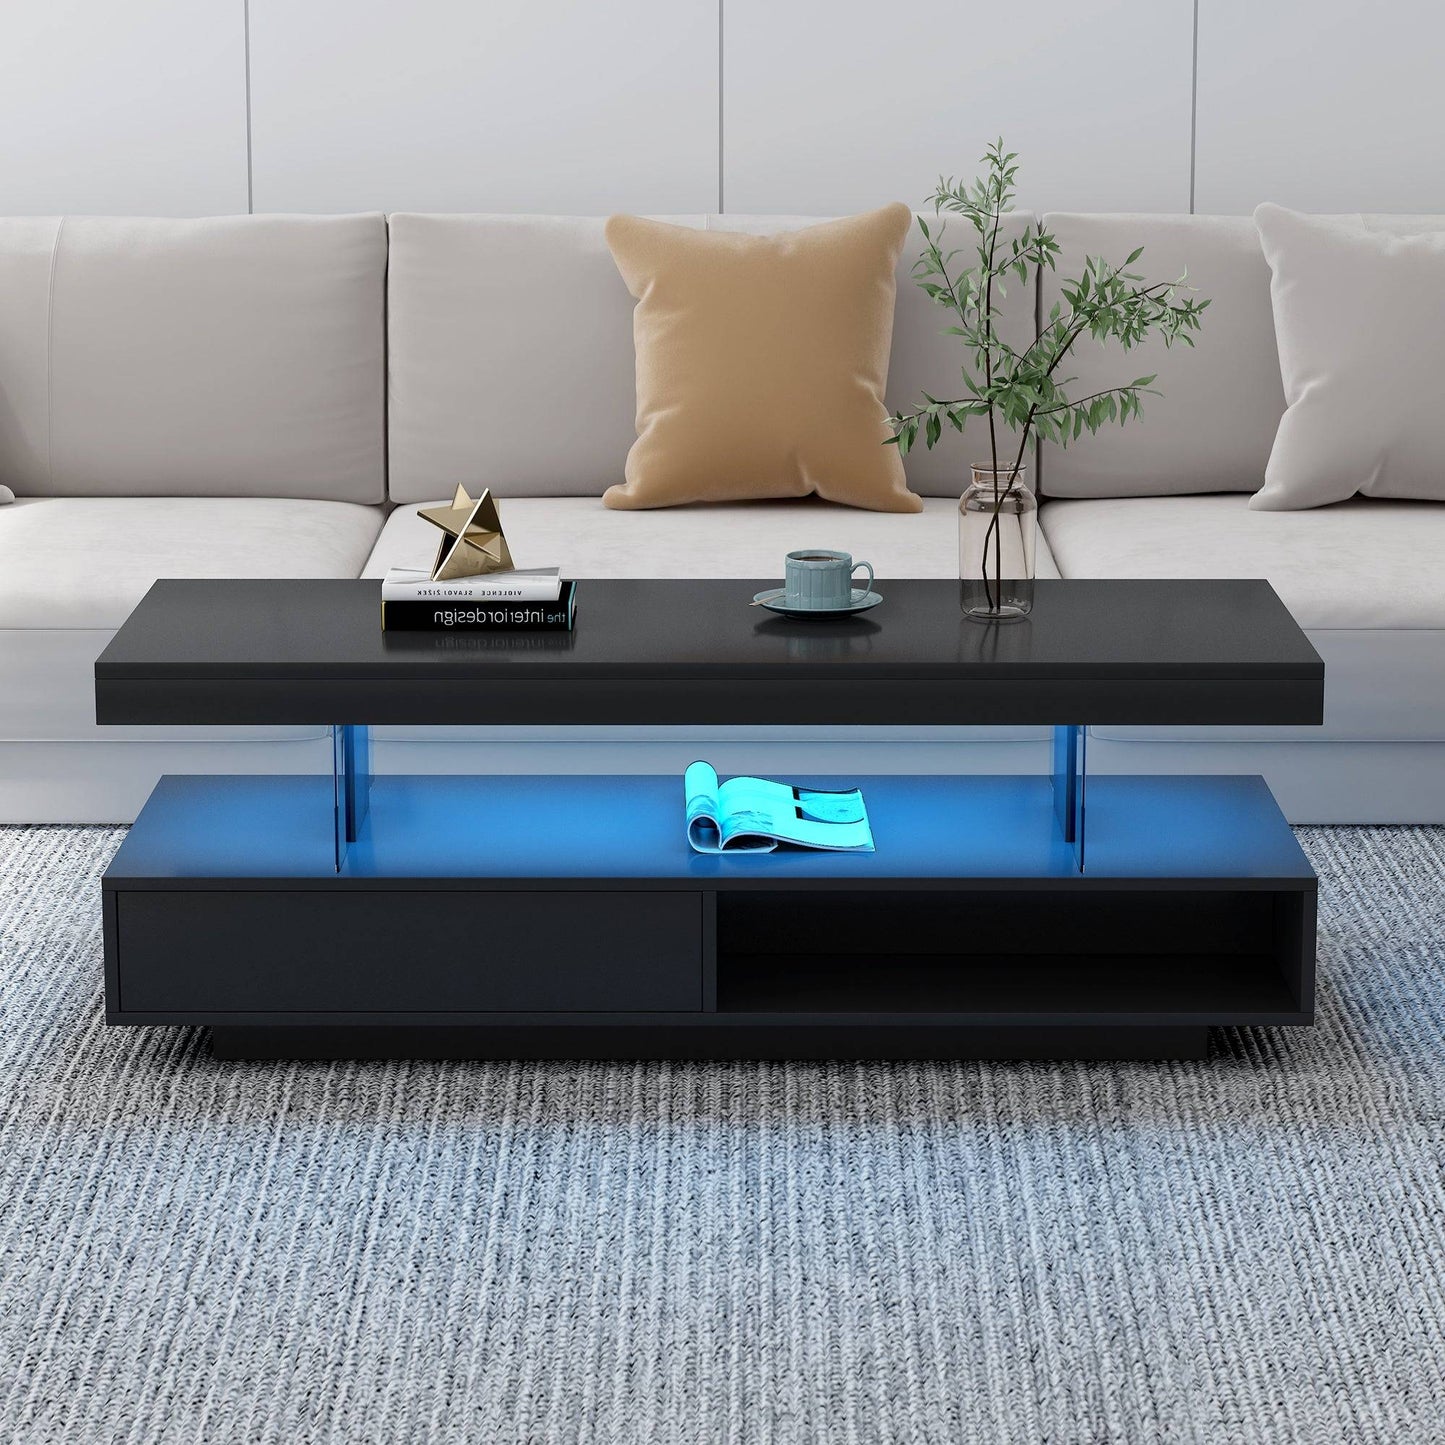 LED Coffee Table with Storage, Modern Center Table with 2 Drawers and Display Shelves, Accent Furniture with LED Lights for Living Room,Black